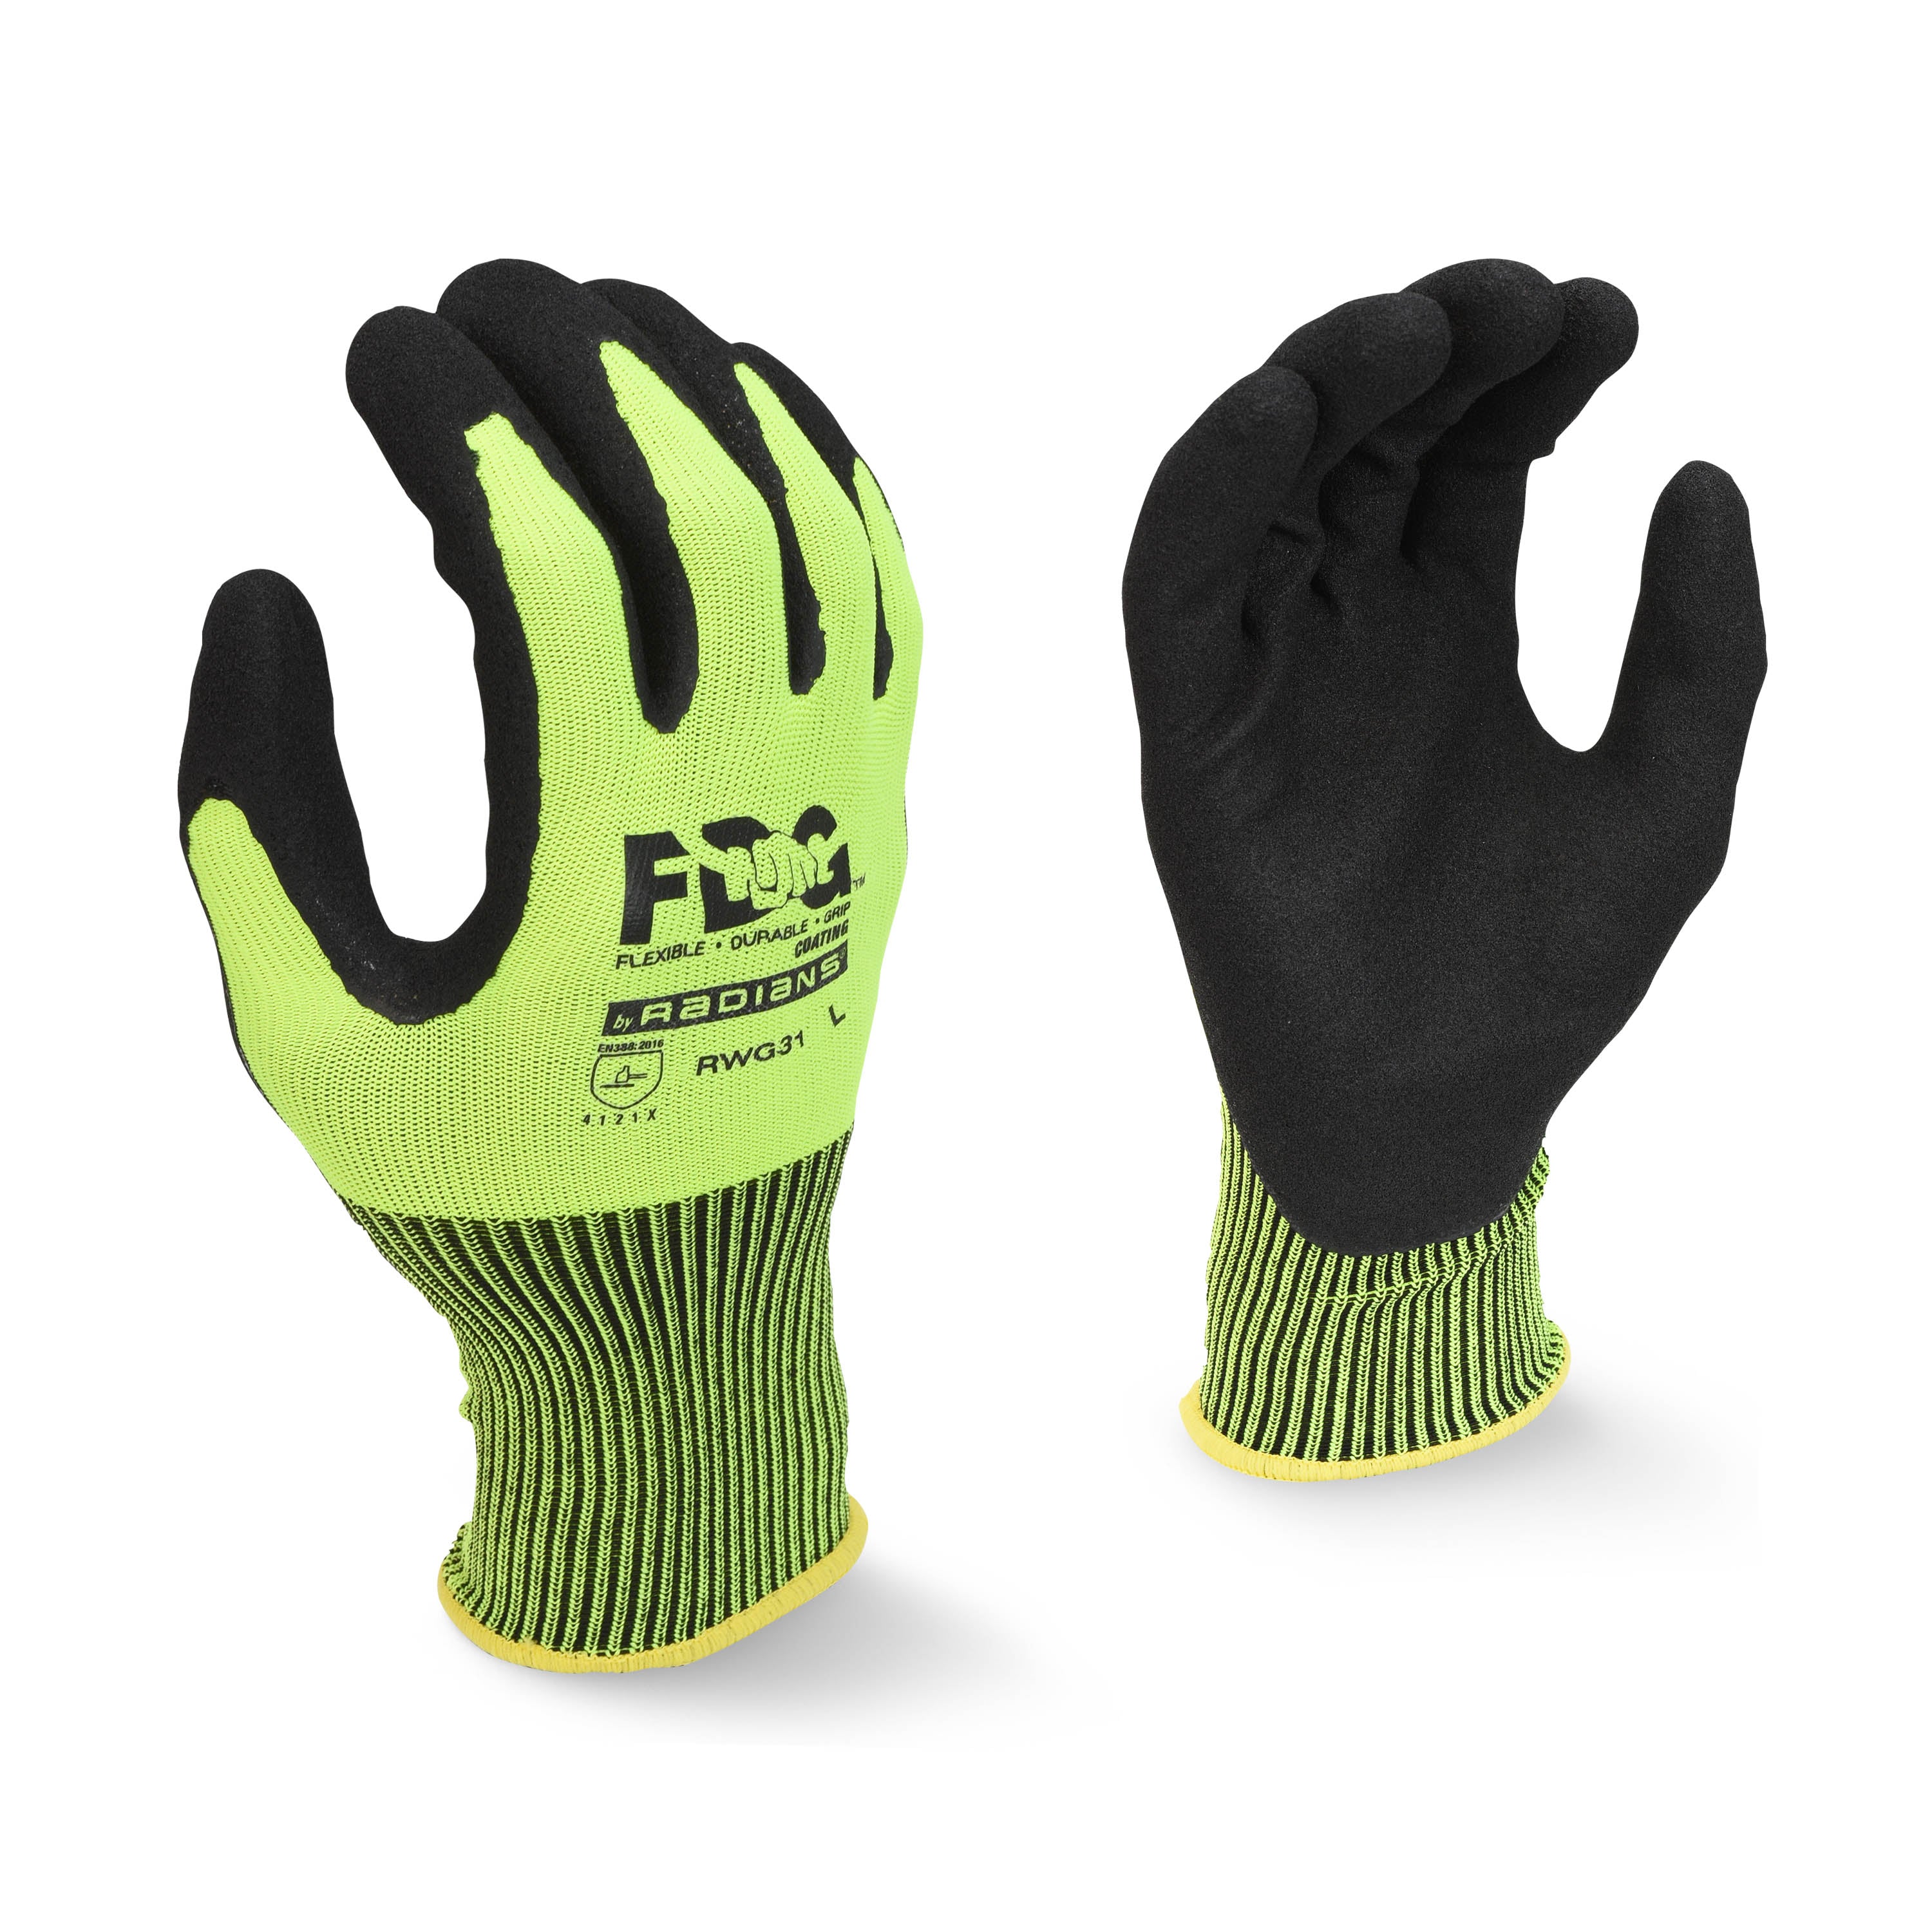 Radians RWG31 FDG Coating High Visibility Work Glove-eSafety Supplies, Inc